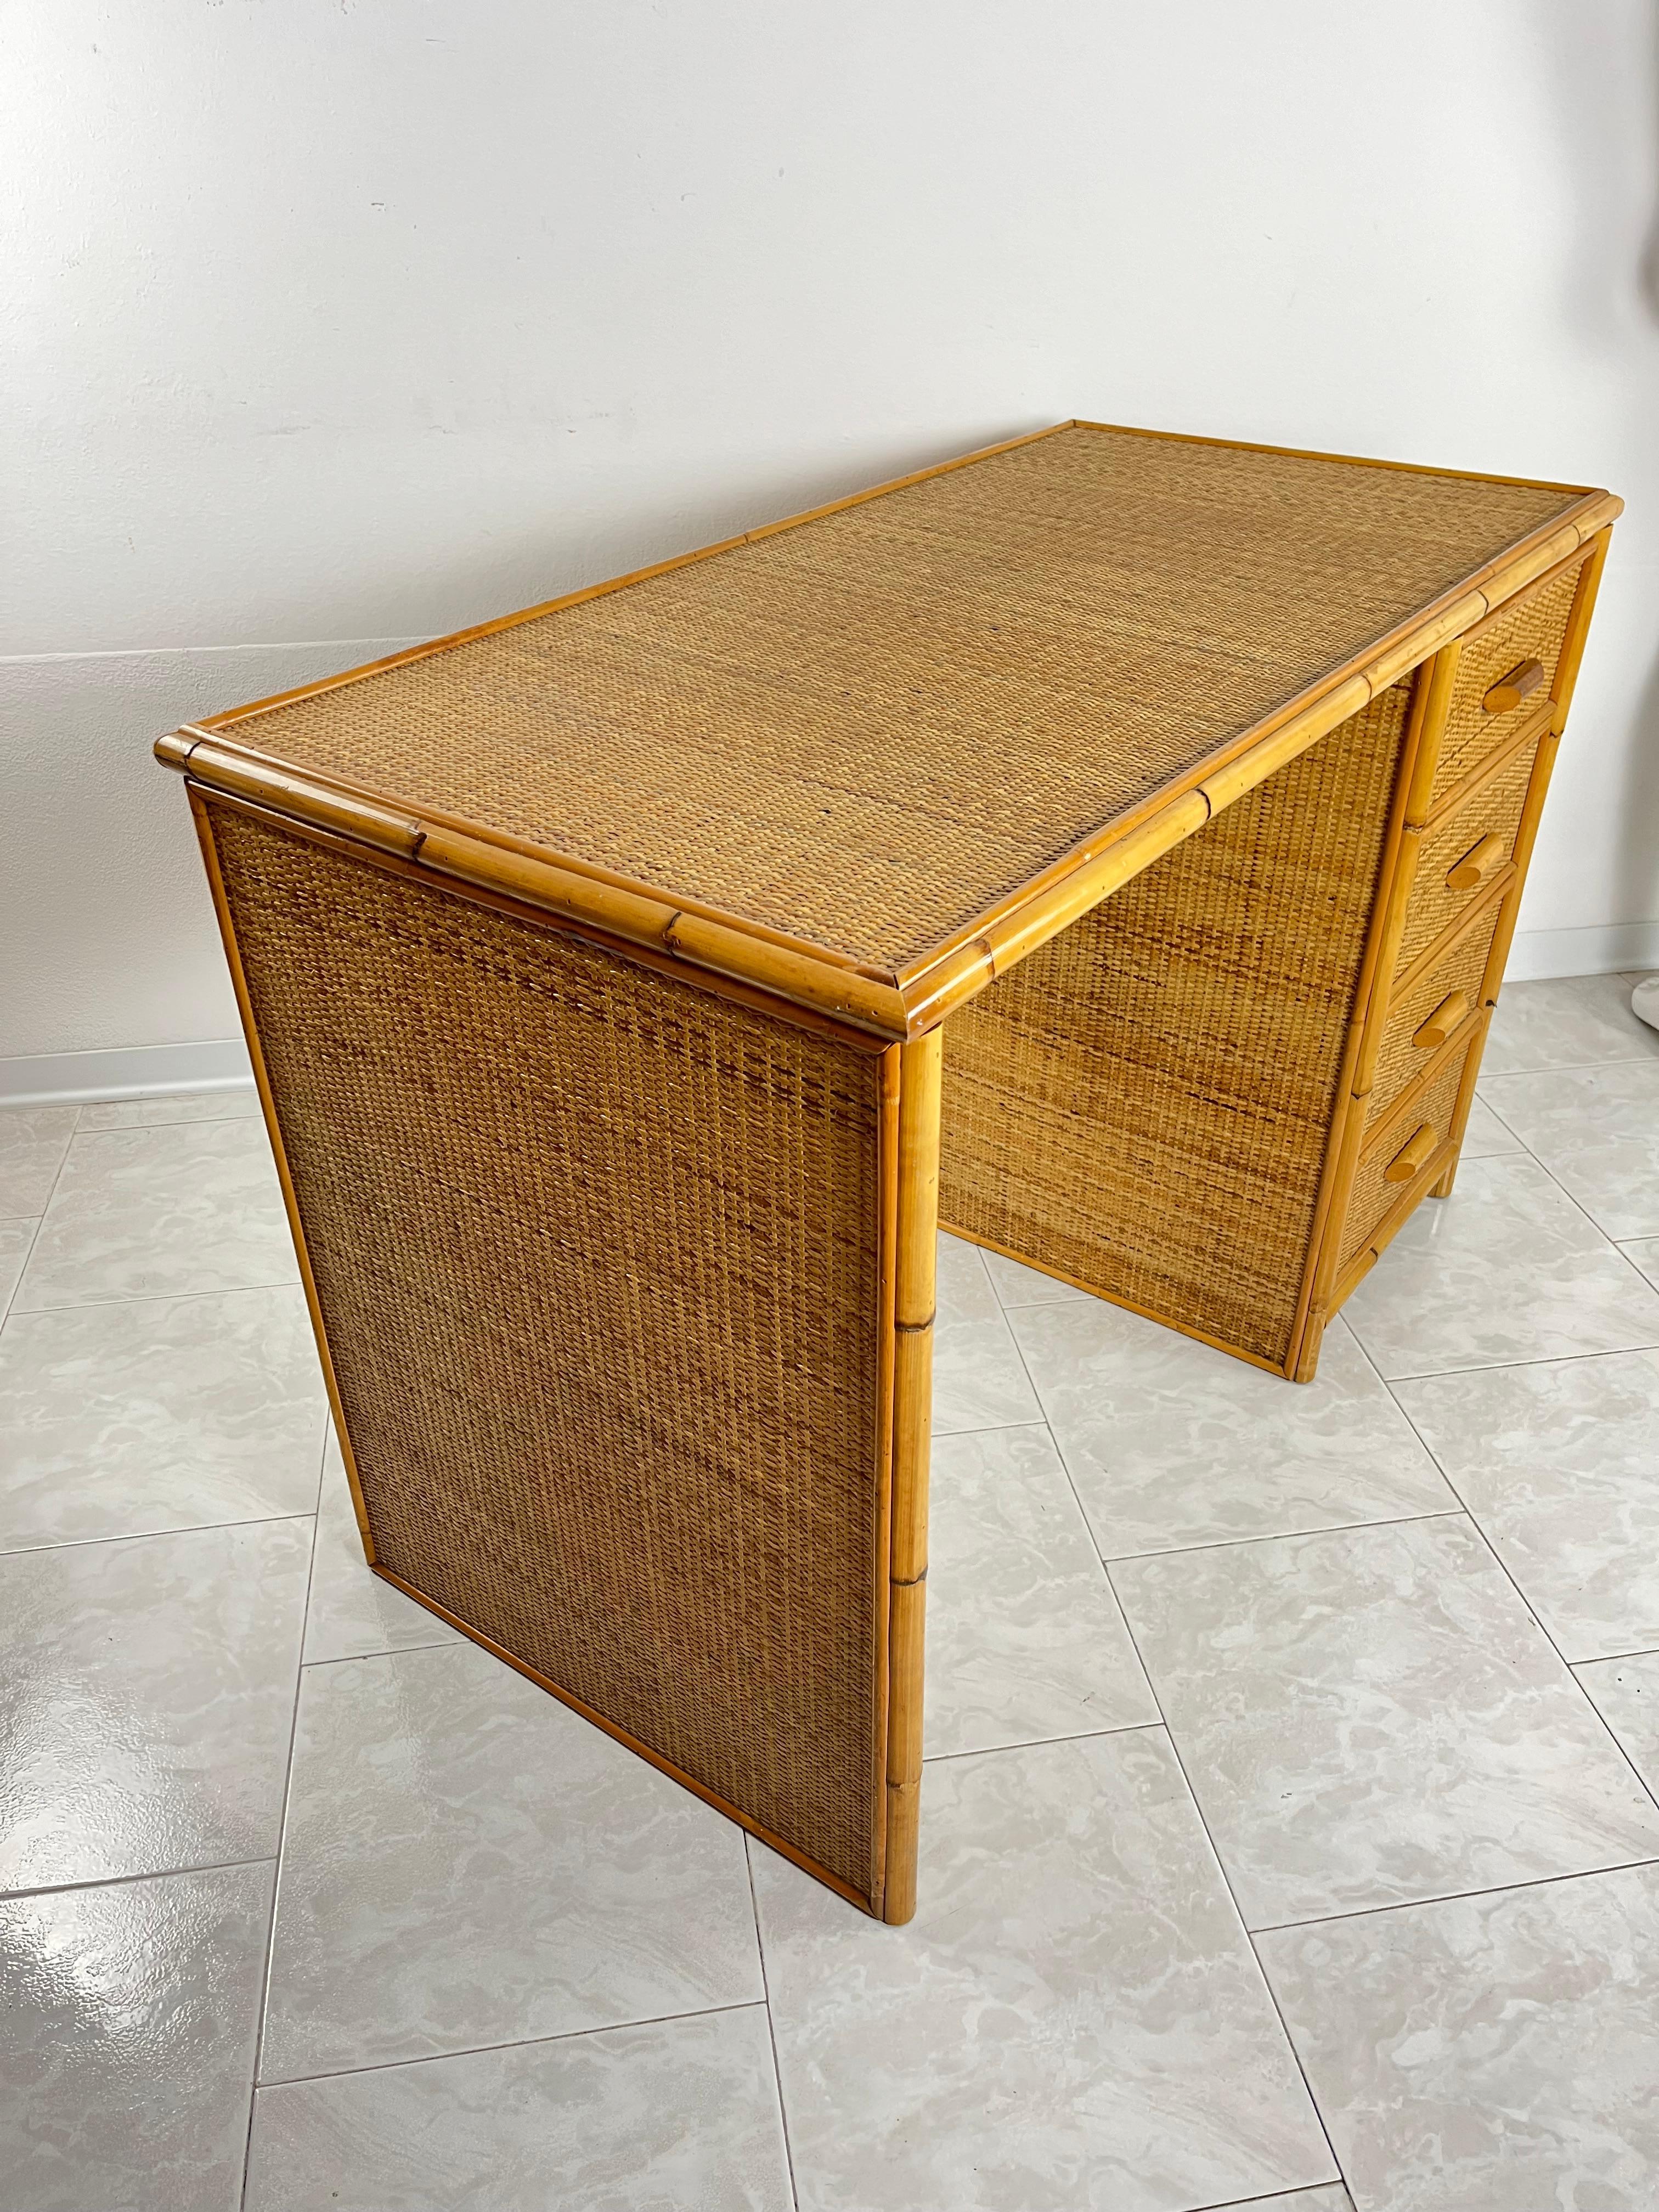 Mid-Century Rattan Wicker And Bamboo Desk Attributed To Dal Vera 1960s For Sale 1